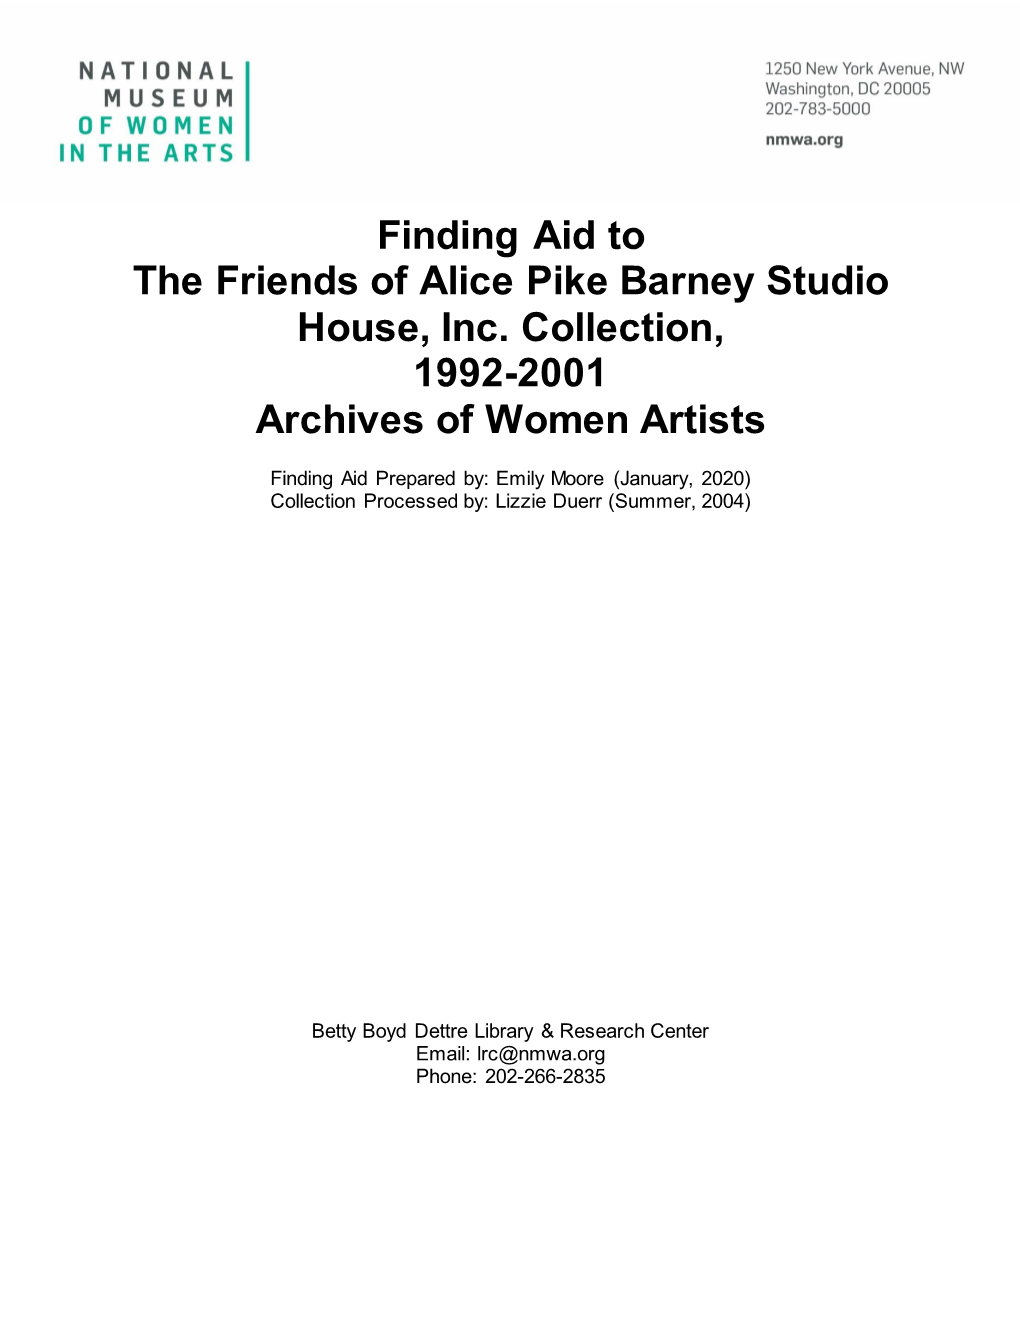 Finding Aid to the Friends of Alice Pike Barney Studio House, Inc